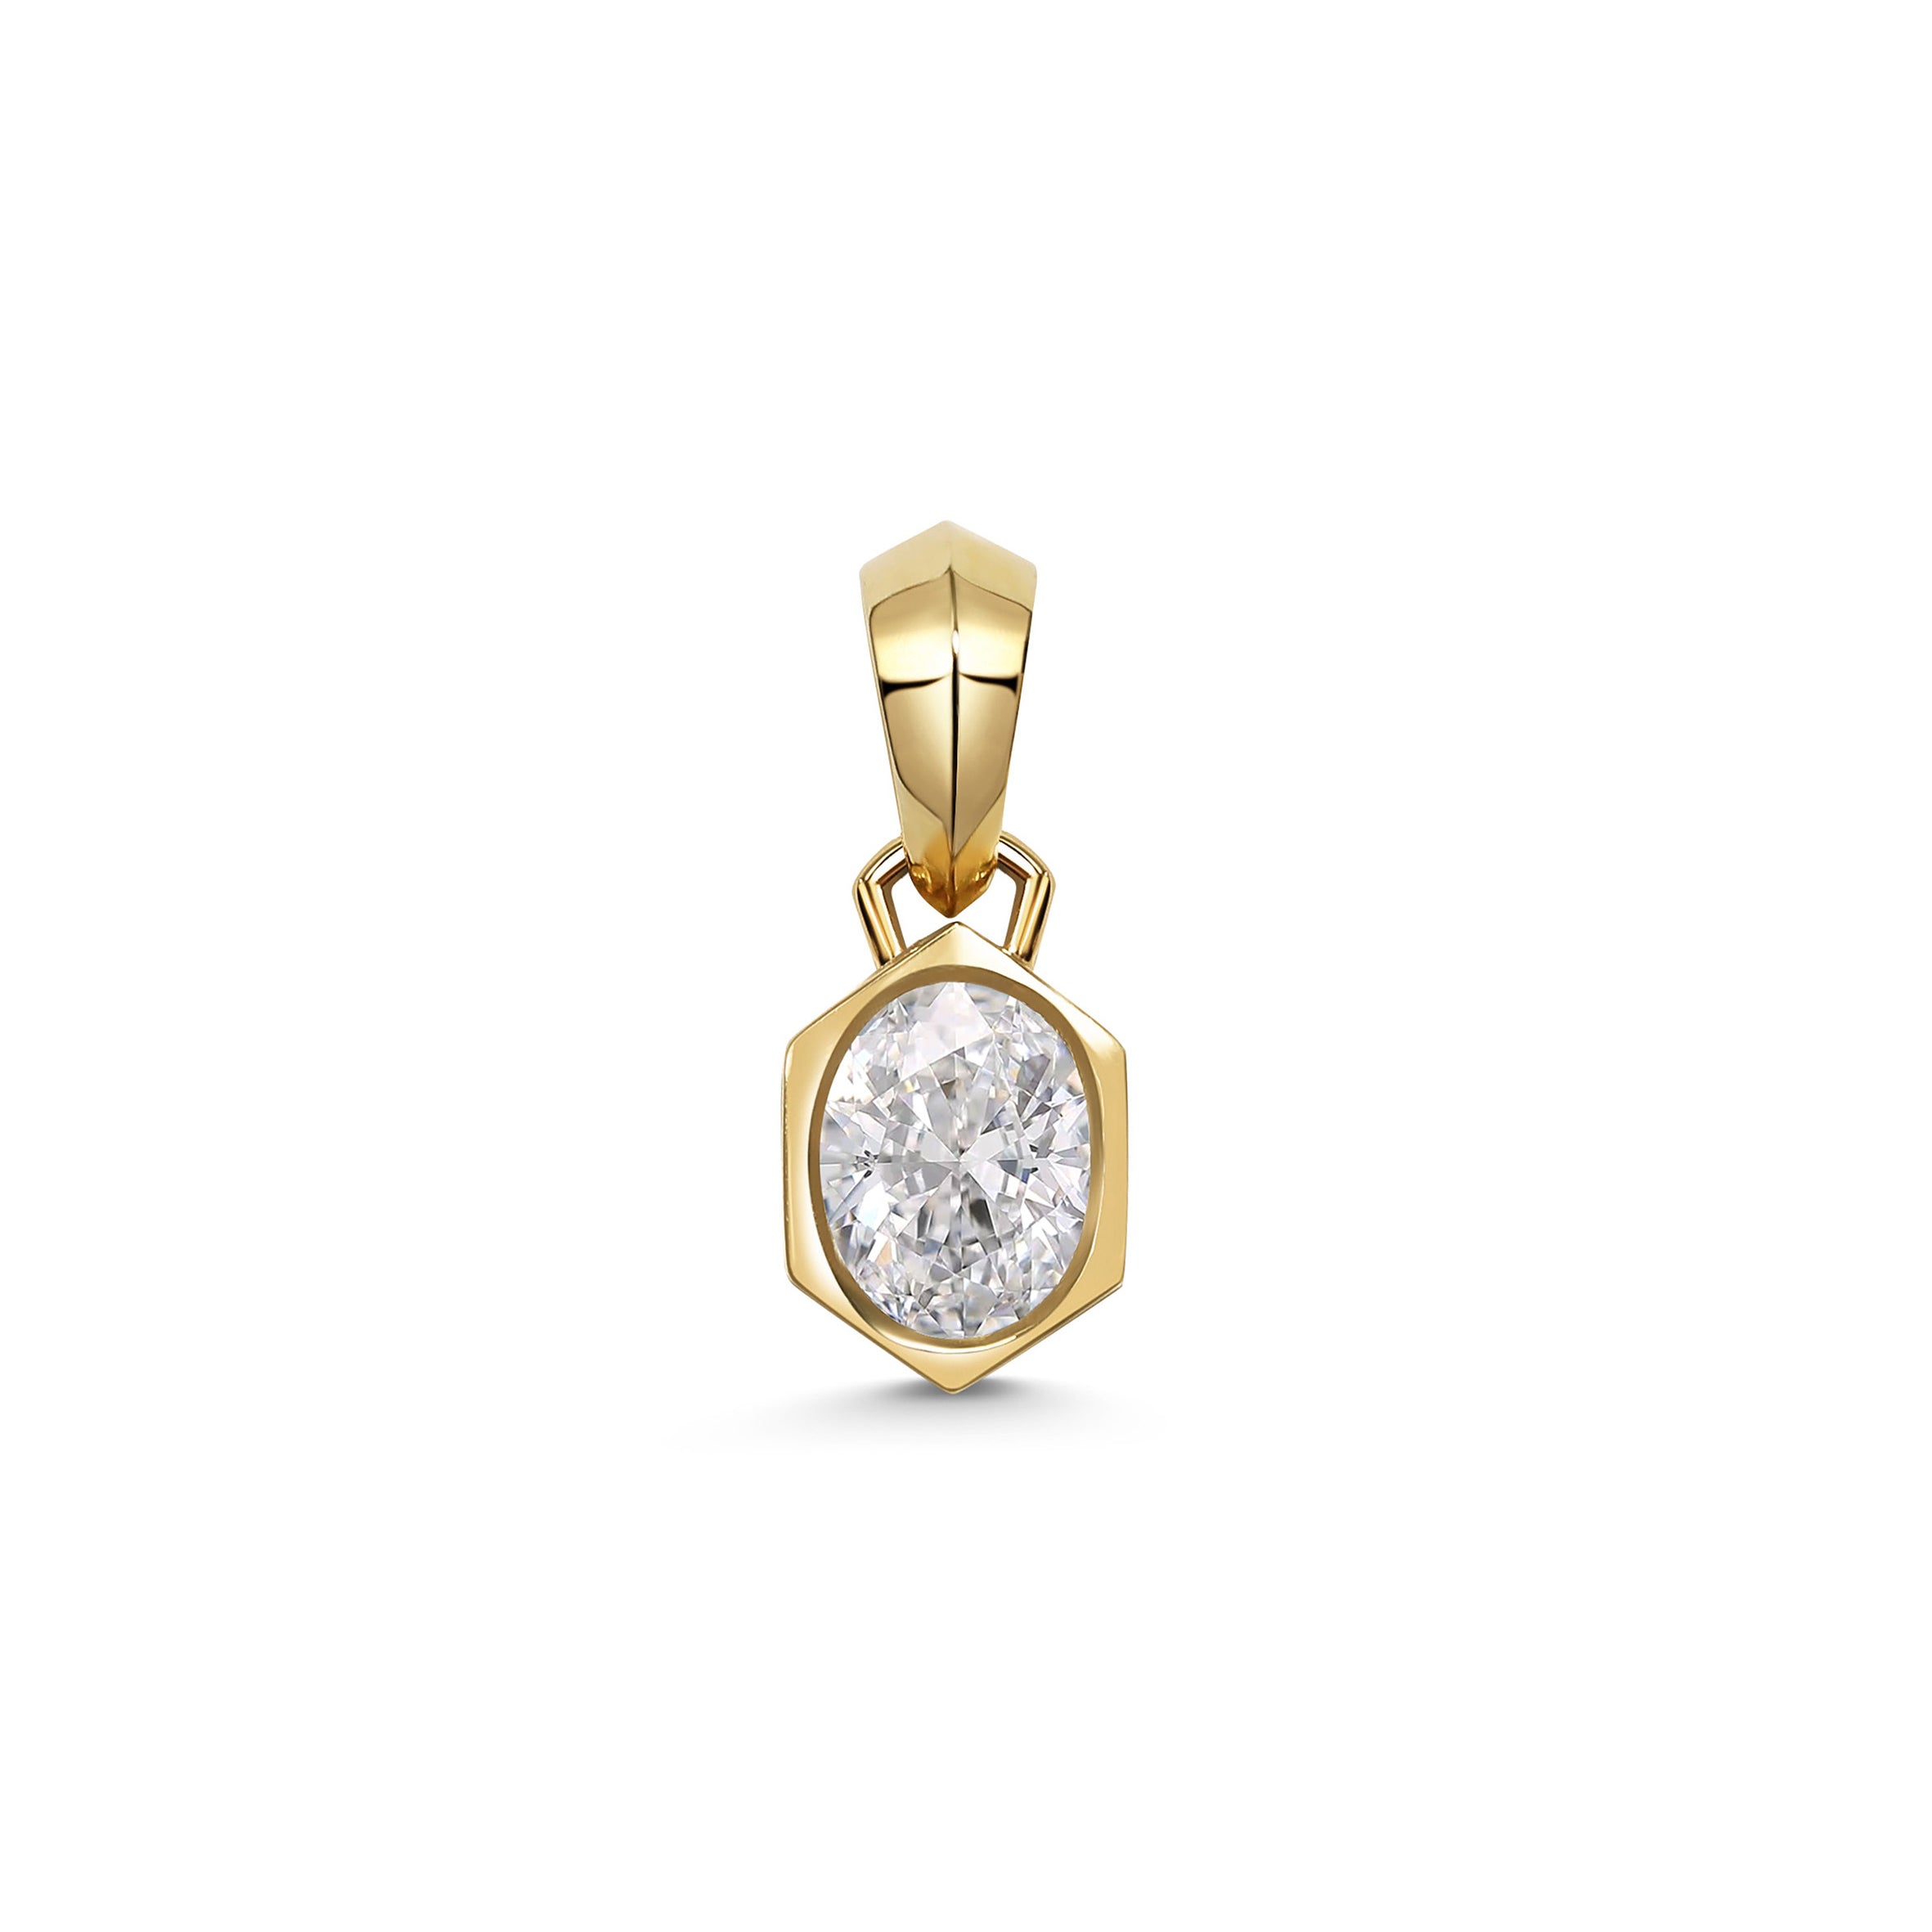 The Chunky Charm Pendant - Oval Cut by East London jeweller Rachel Boston | Discover our collections of unique and timeless engagement rings, wedding rings, and modern fine jewellery.